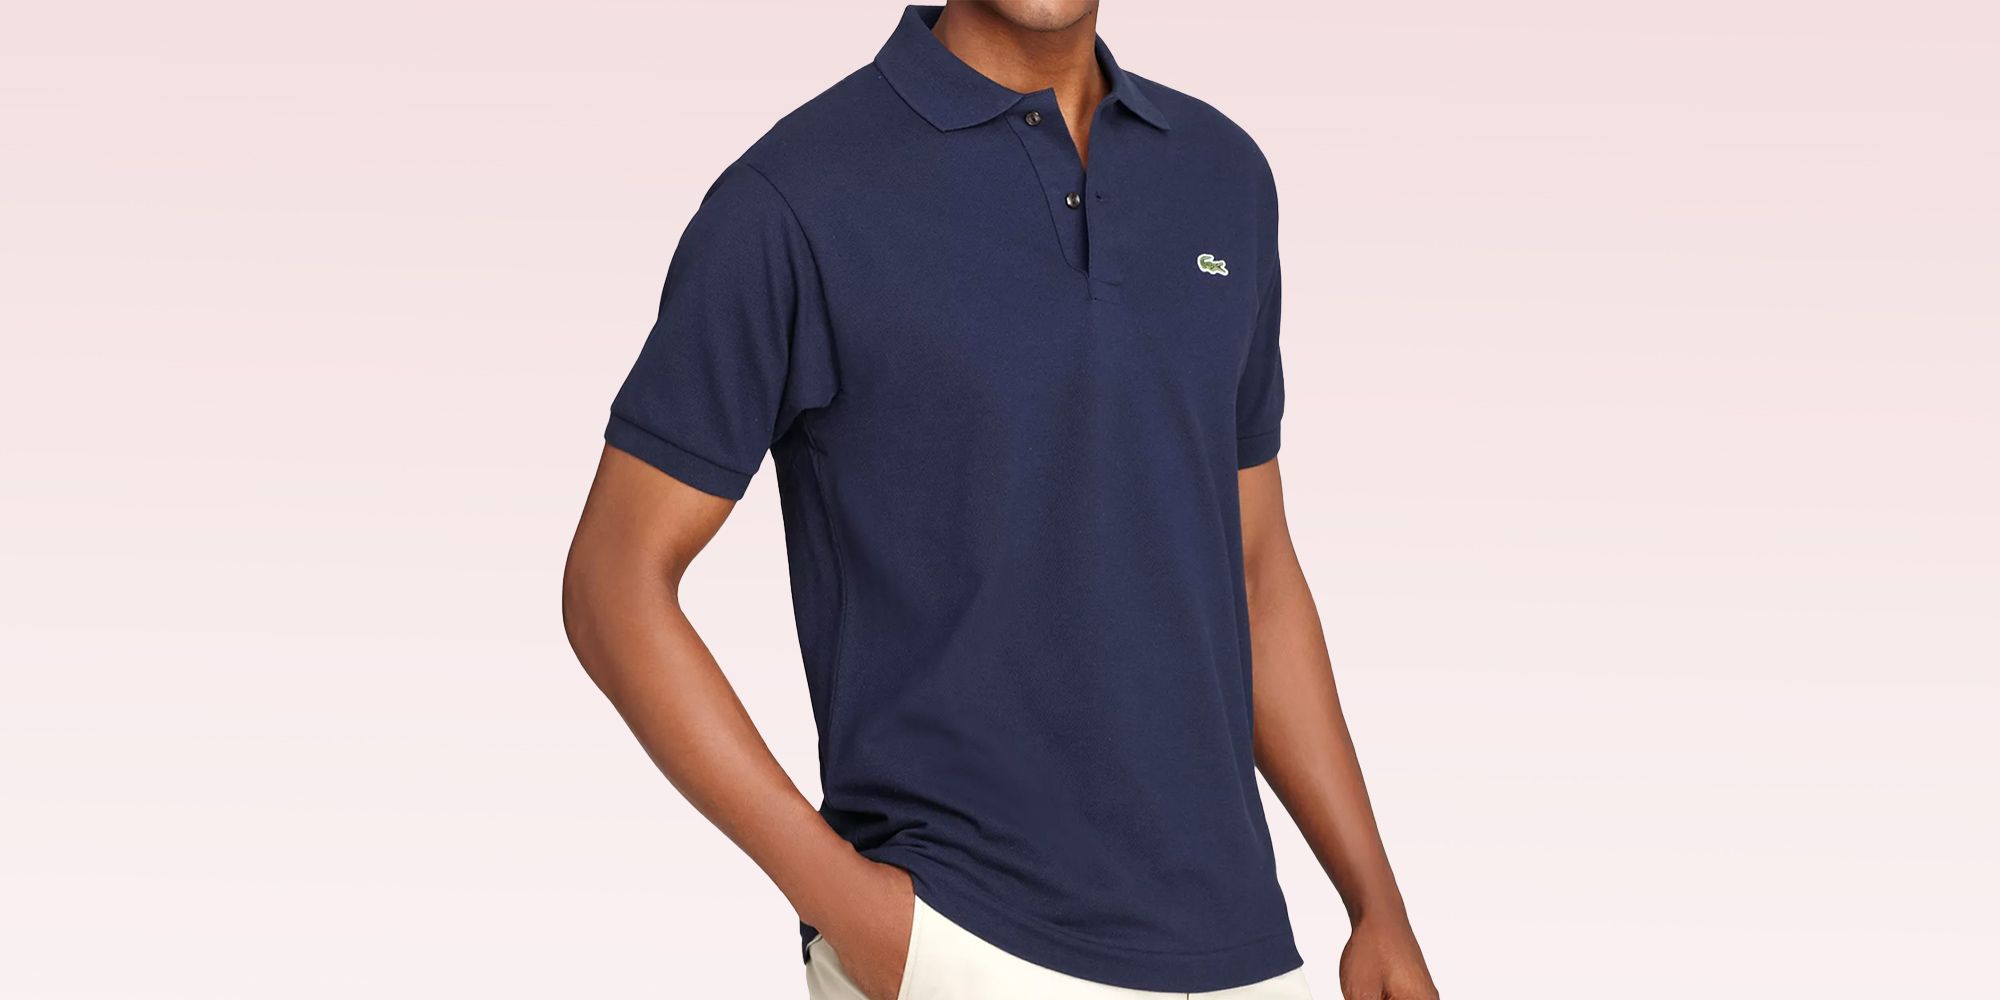 You Can Get Now, Discount Deep at Prime Right of Courtesy Polo Day Signature Lacoste\'s a